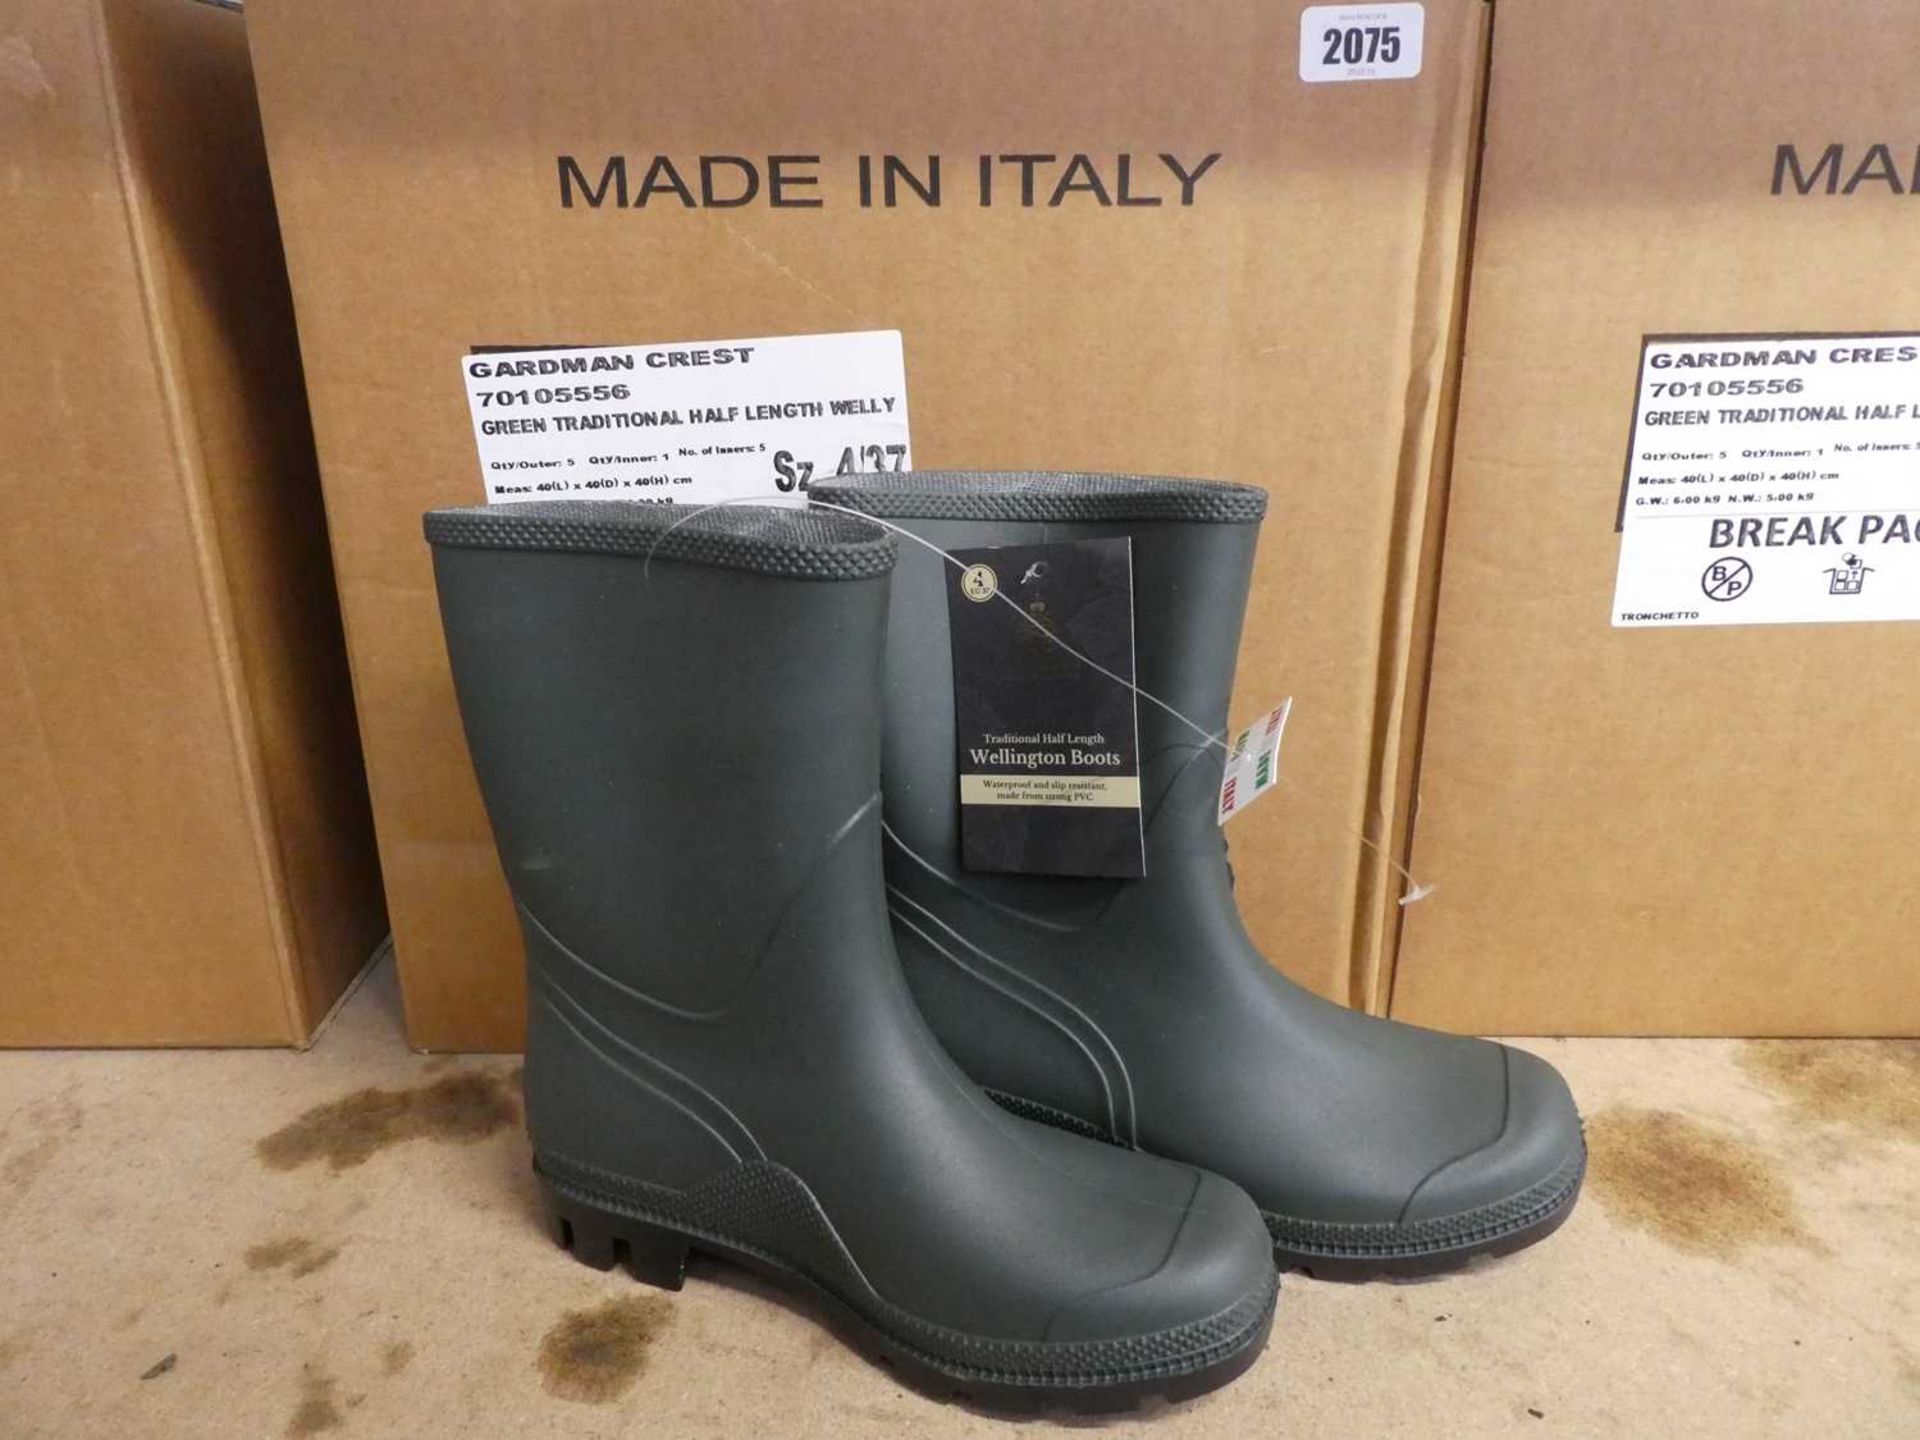 3 boxes containing 5 pairs (each) of Kent and Stowe green traditional half length wellies - size - Image 2 of 4